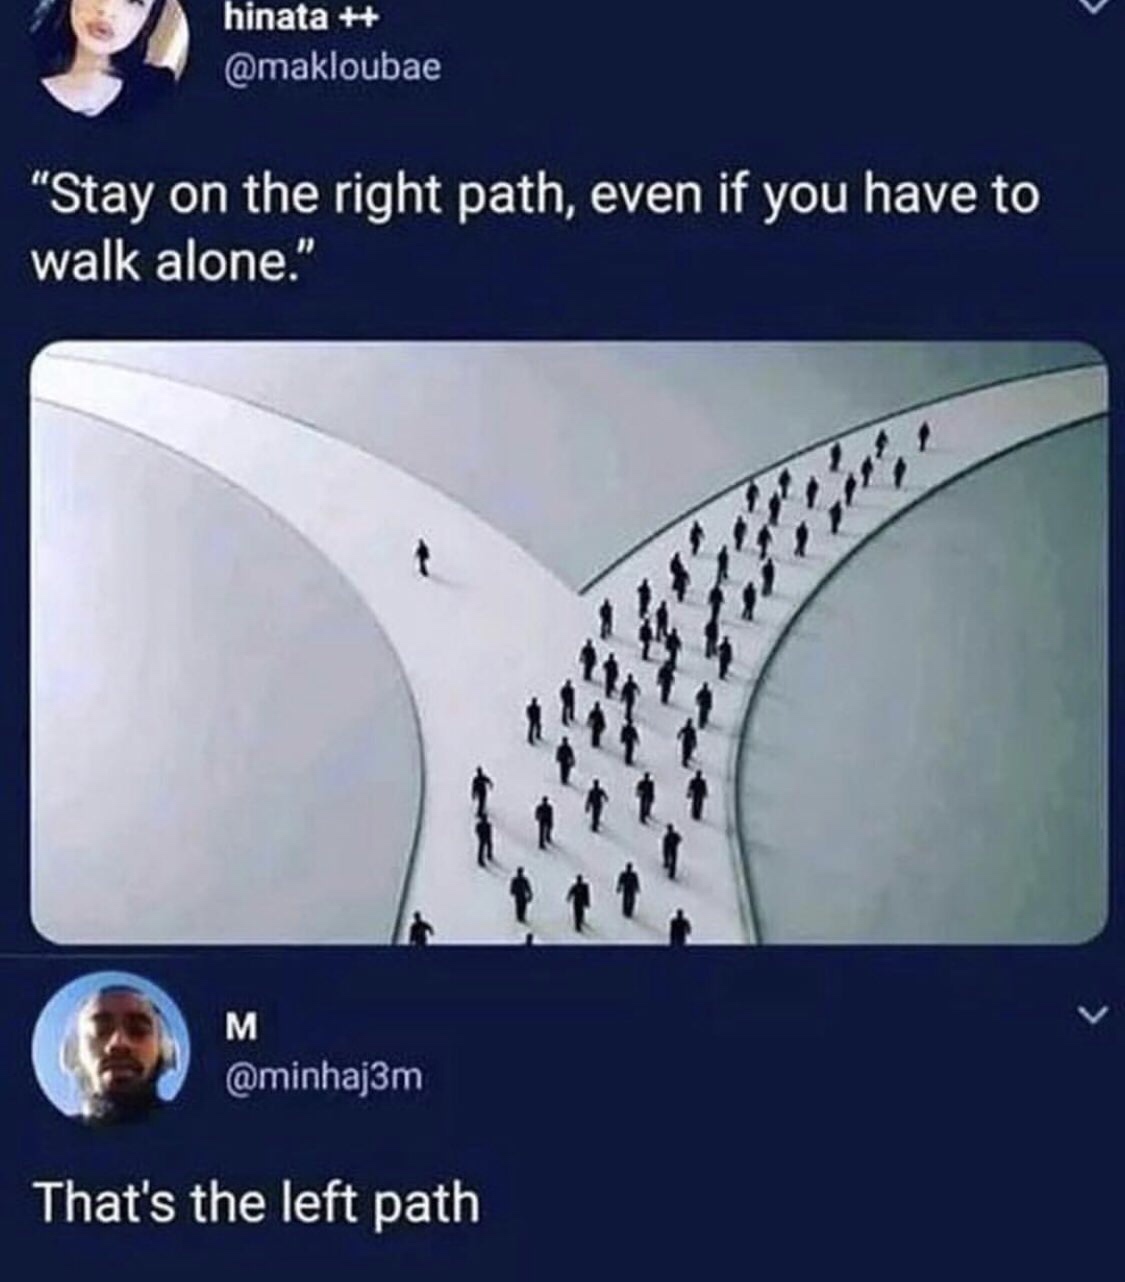 memes - stay on the right path even if you have to walk alone - hinata "Stay on the right path, even if you have to walk alone." That's the left path